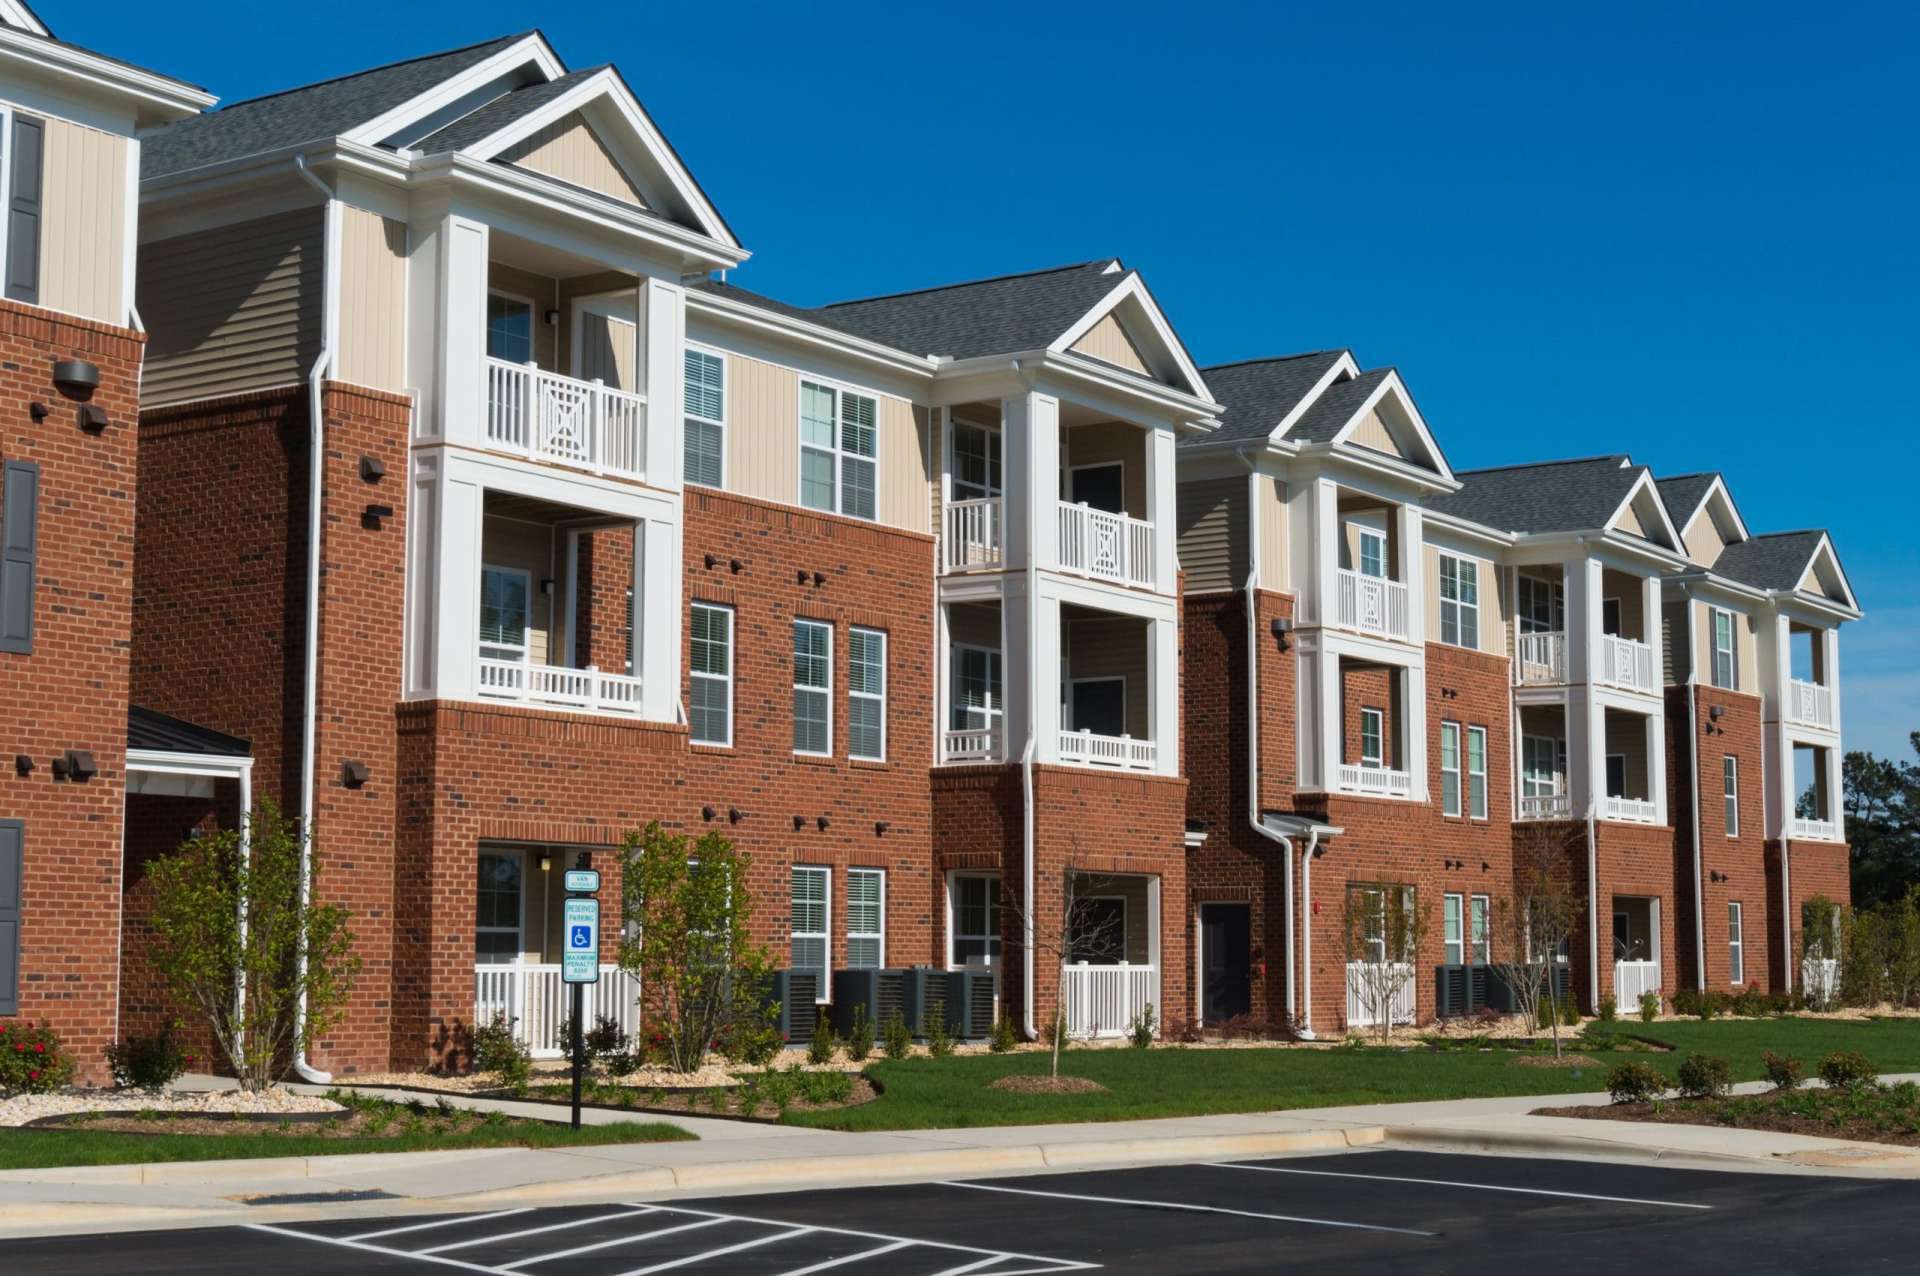 Apartment Complexes: The $300 Dilemma - Will They Deny You?